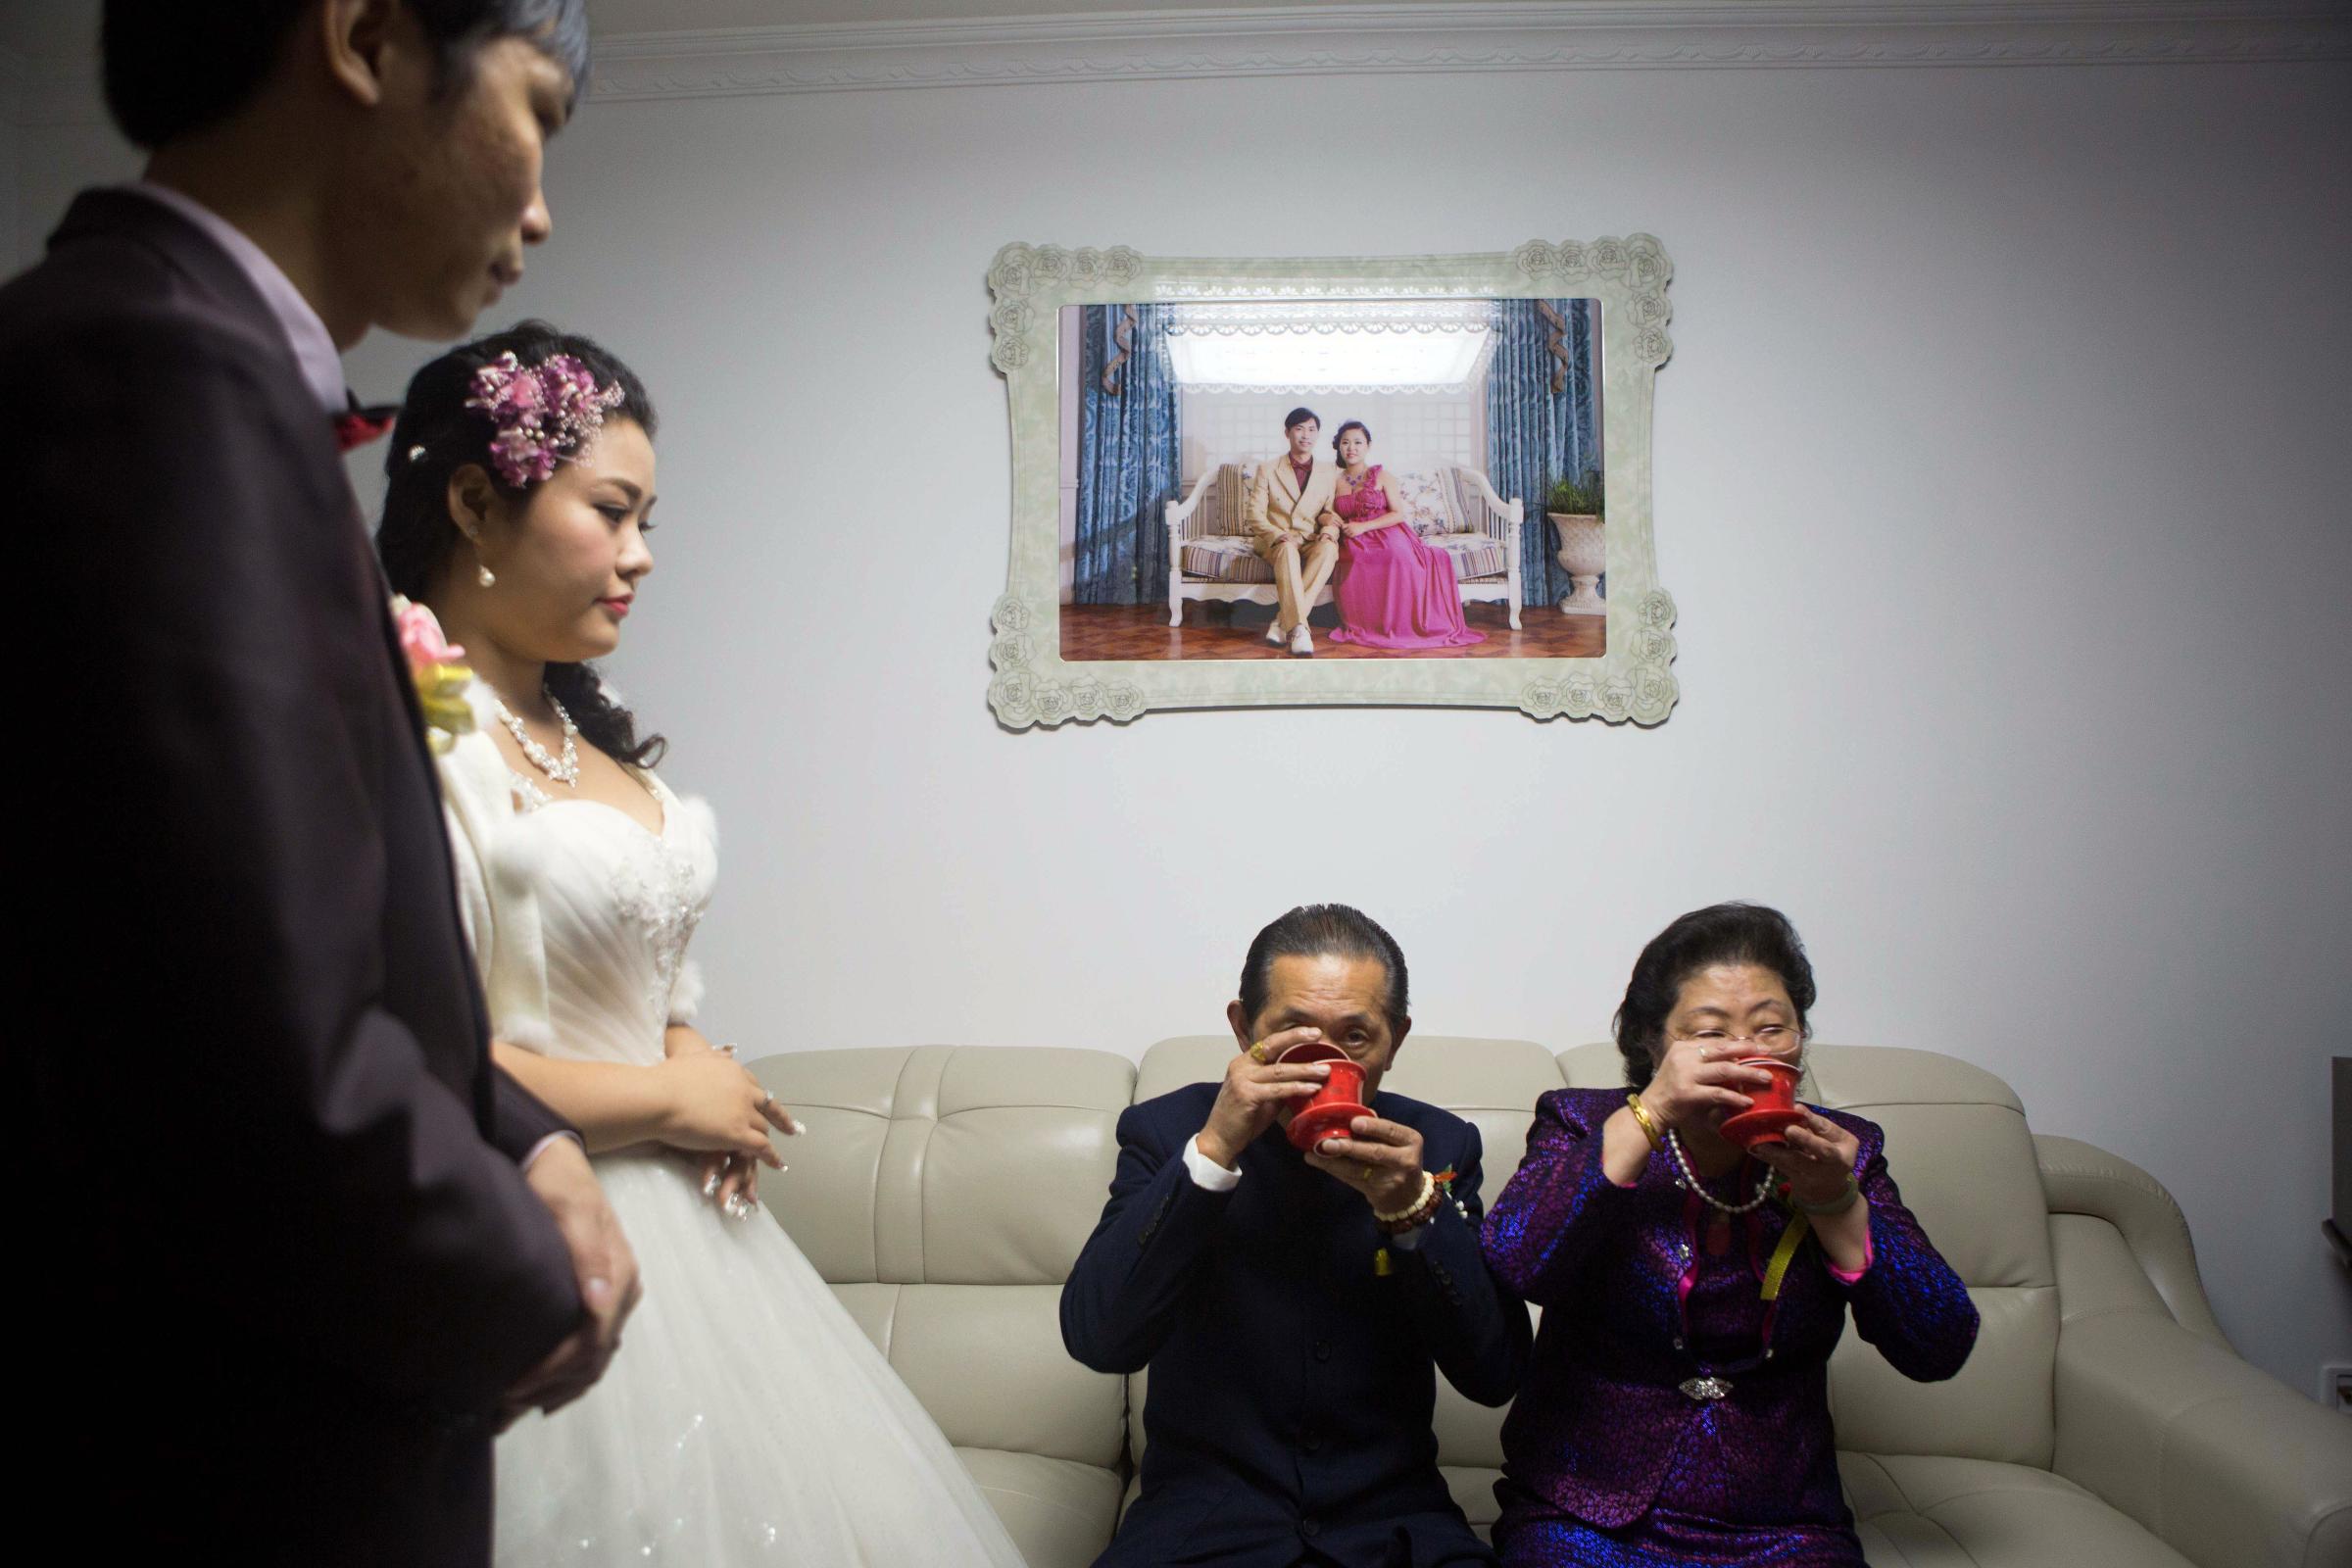 Xia Jiachen and Xu Chuyun, at left, honor the groom's grandparents during their wedding in November 2015. Pre-wedding photos are displayed on the wall.